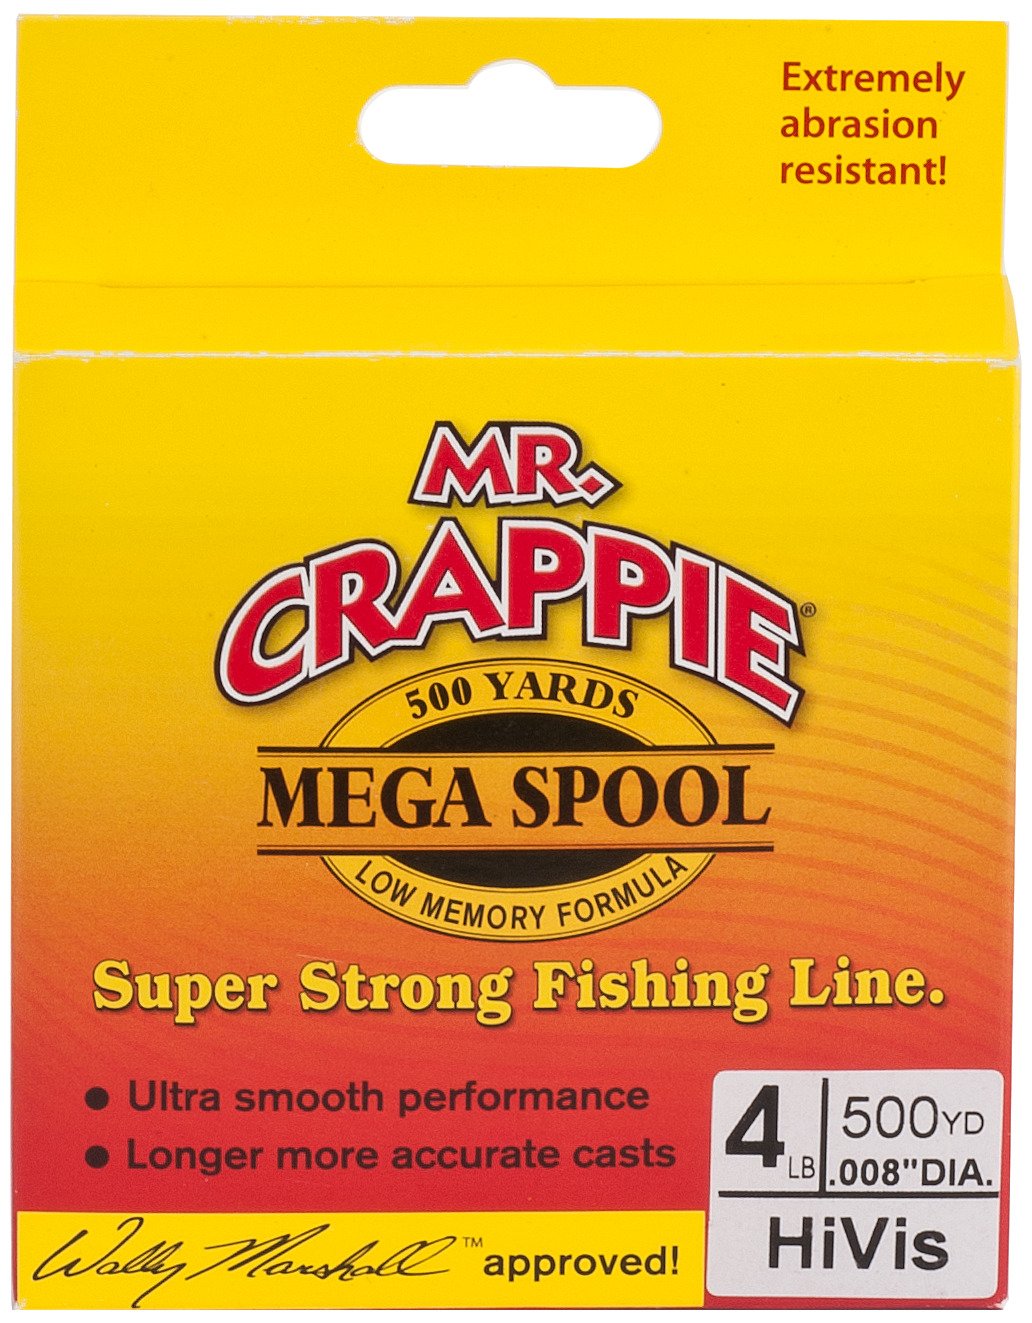  Lew's Mr. Crappie Mega Spool Monofilament Fishing Line, 6-Pound  Tested, Low Memory and Stretch, Camo : General Sporting Equipment : Sports  & Outdoors